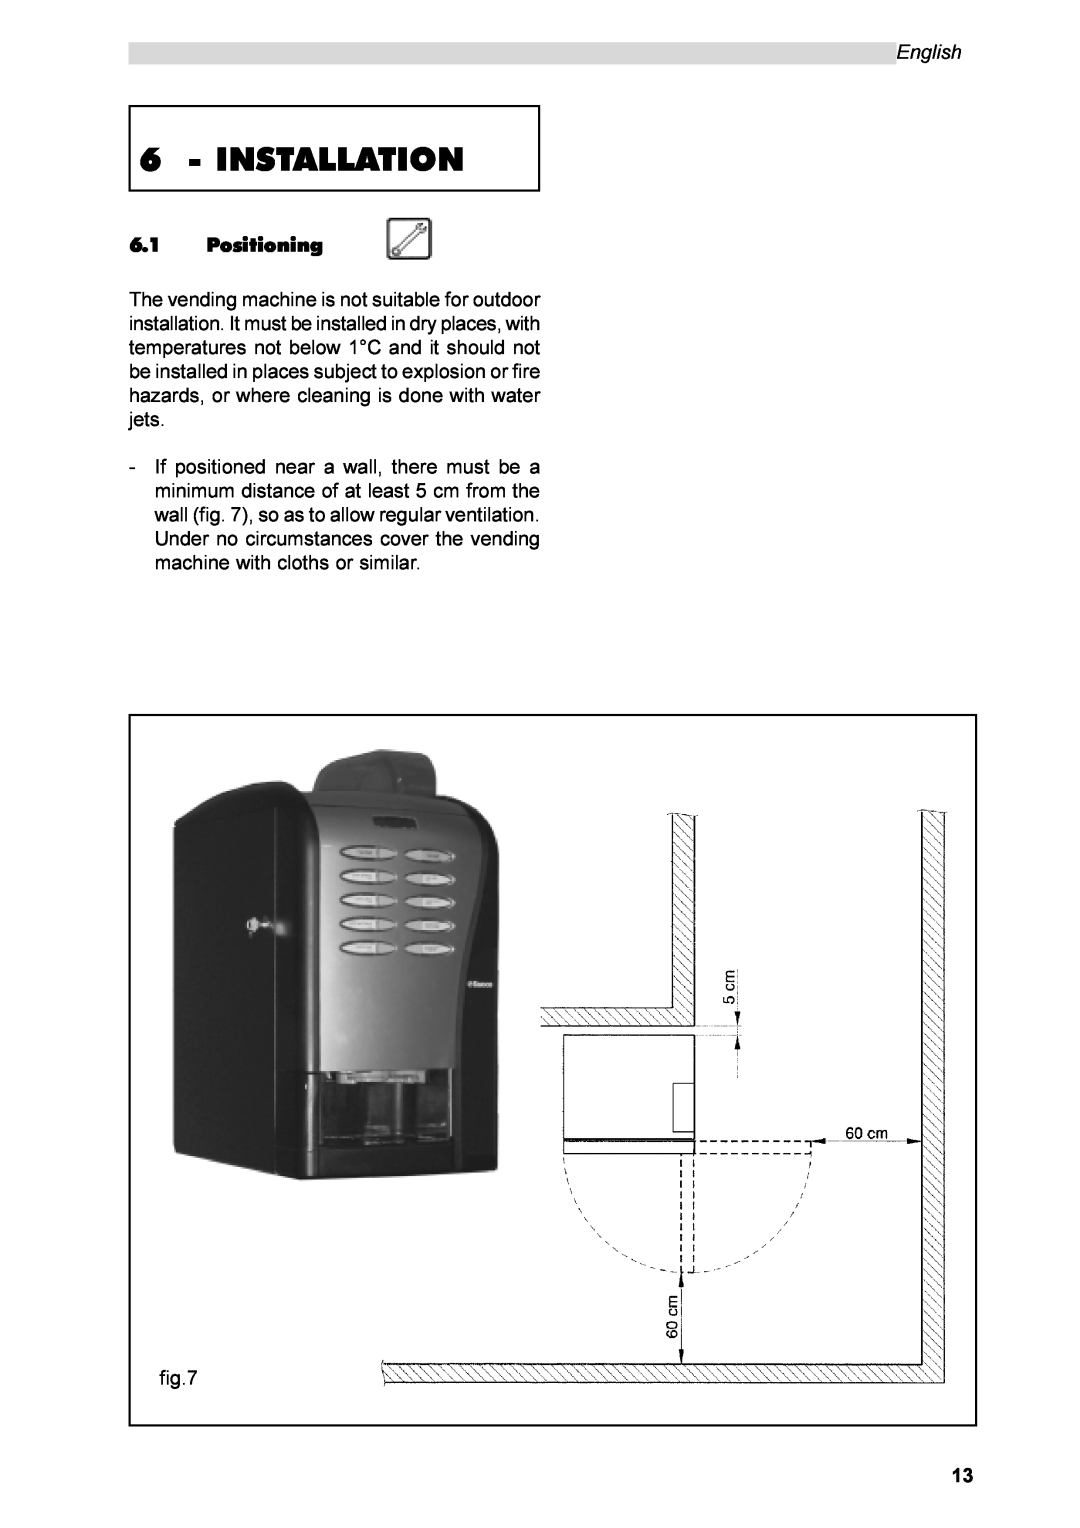 Saeco Coffee Makers SG200E instruction manual Installation, English, Positioning 